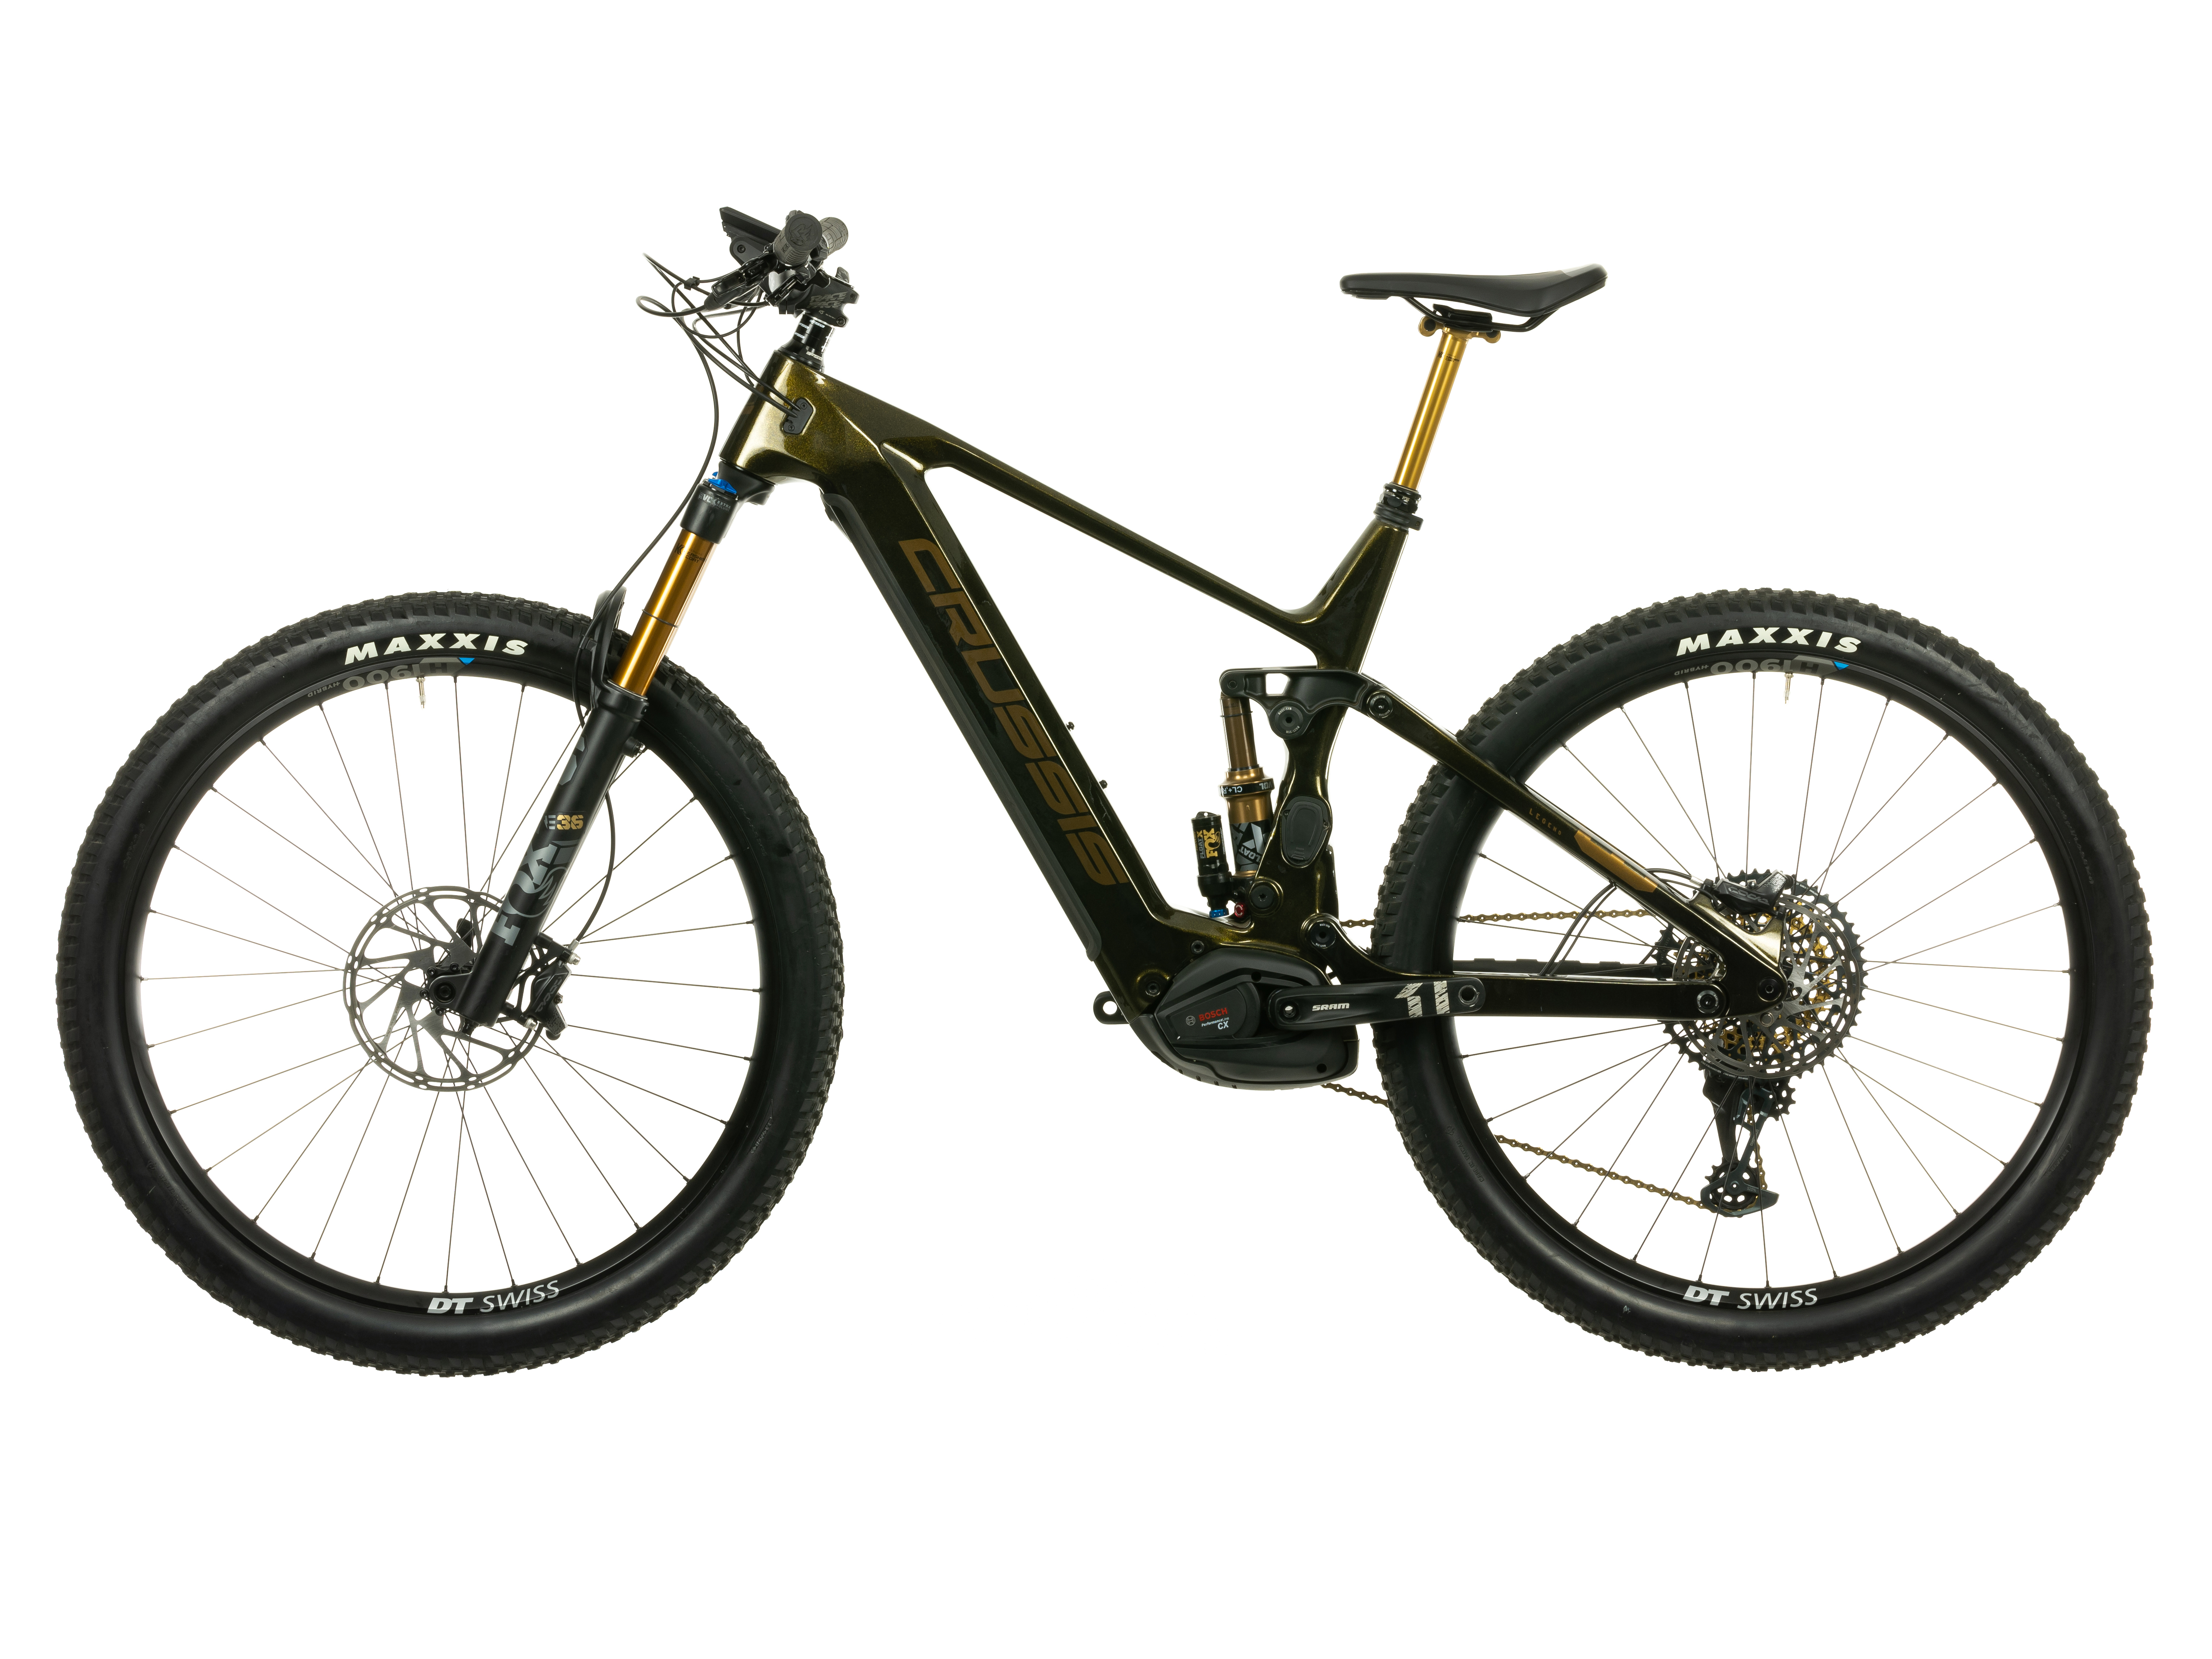 CRUSSIS LEGEND 68 E-Mountainbike Fully Carbon LIMITED EDITION